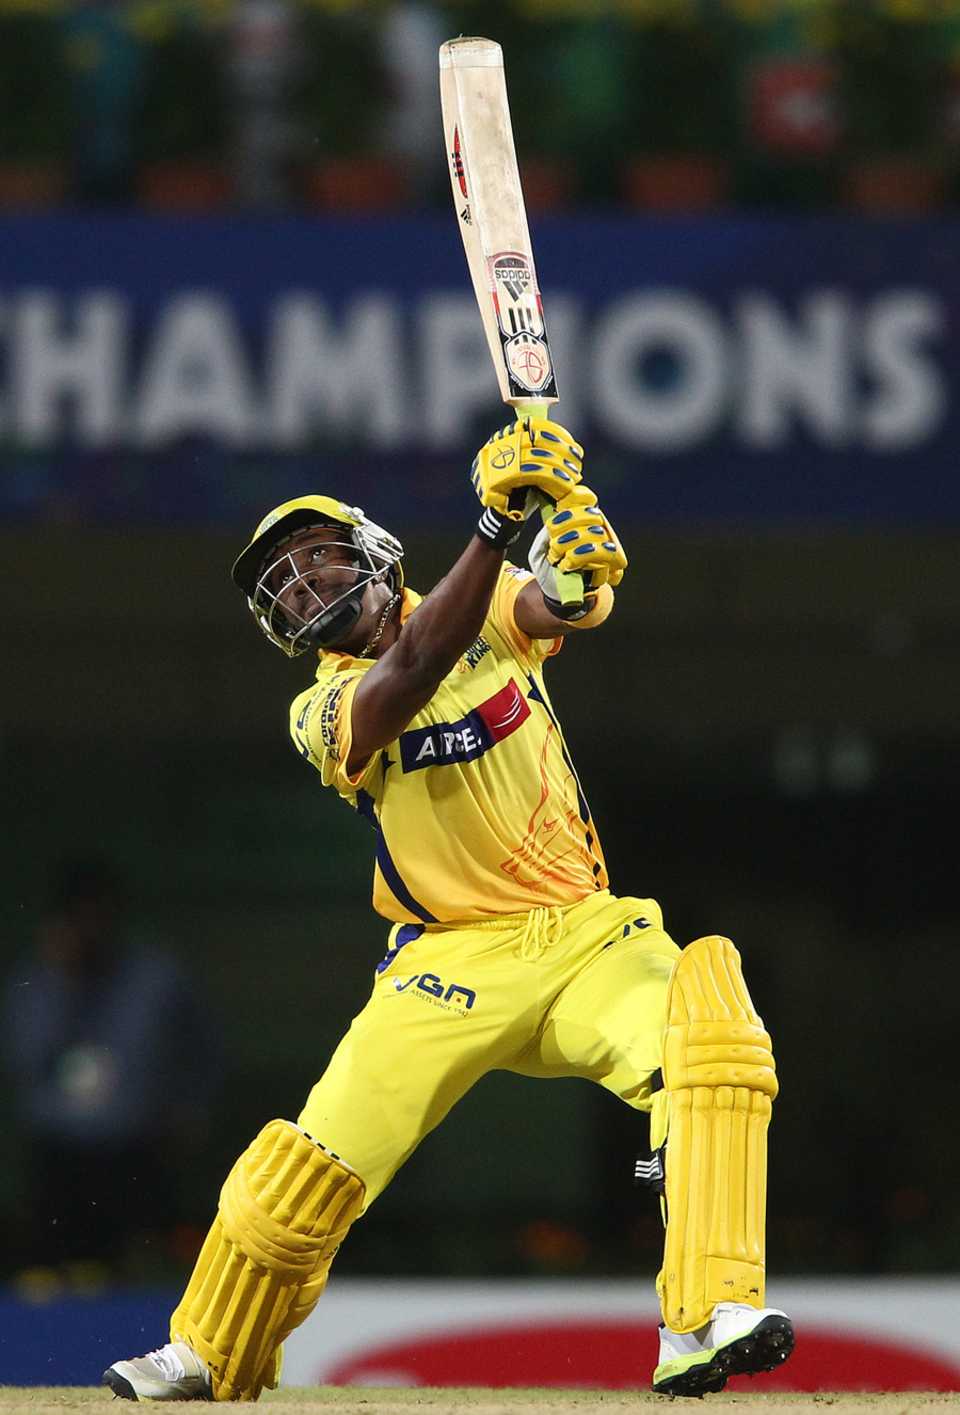 Dwayne Bravo hit his trademark sixes over extra cover during a cameo